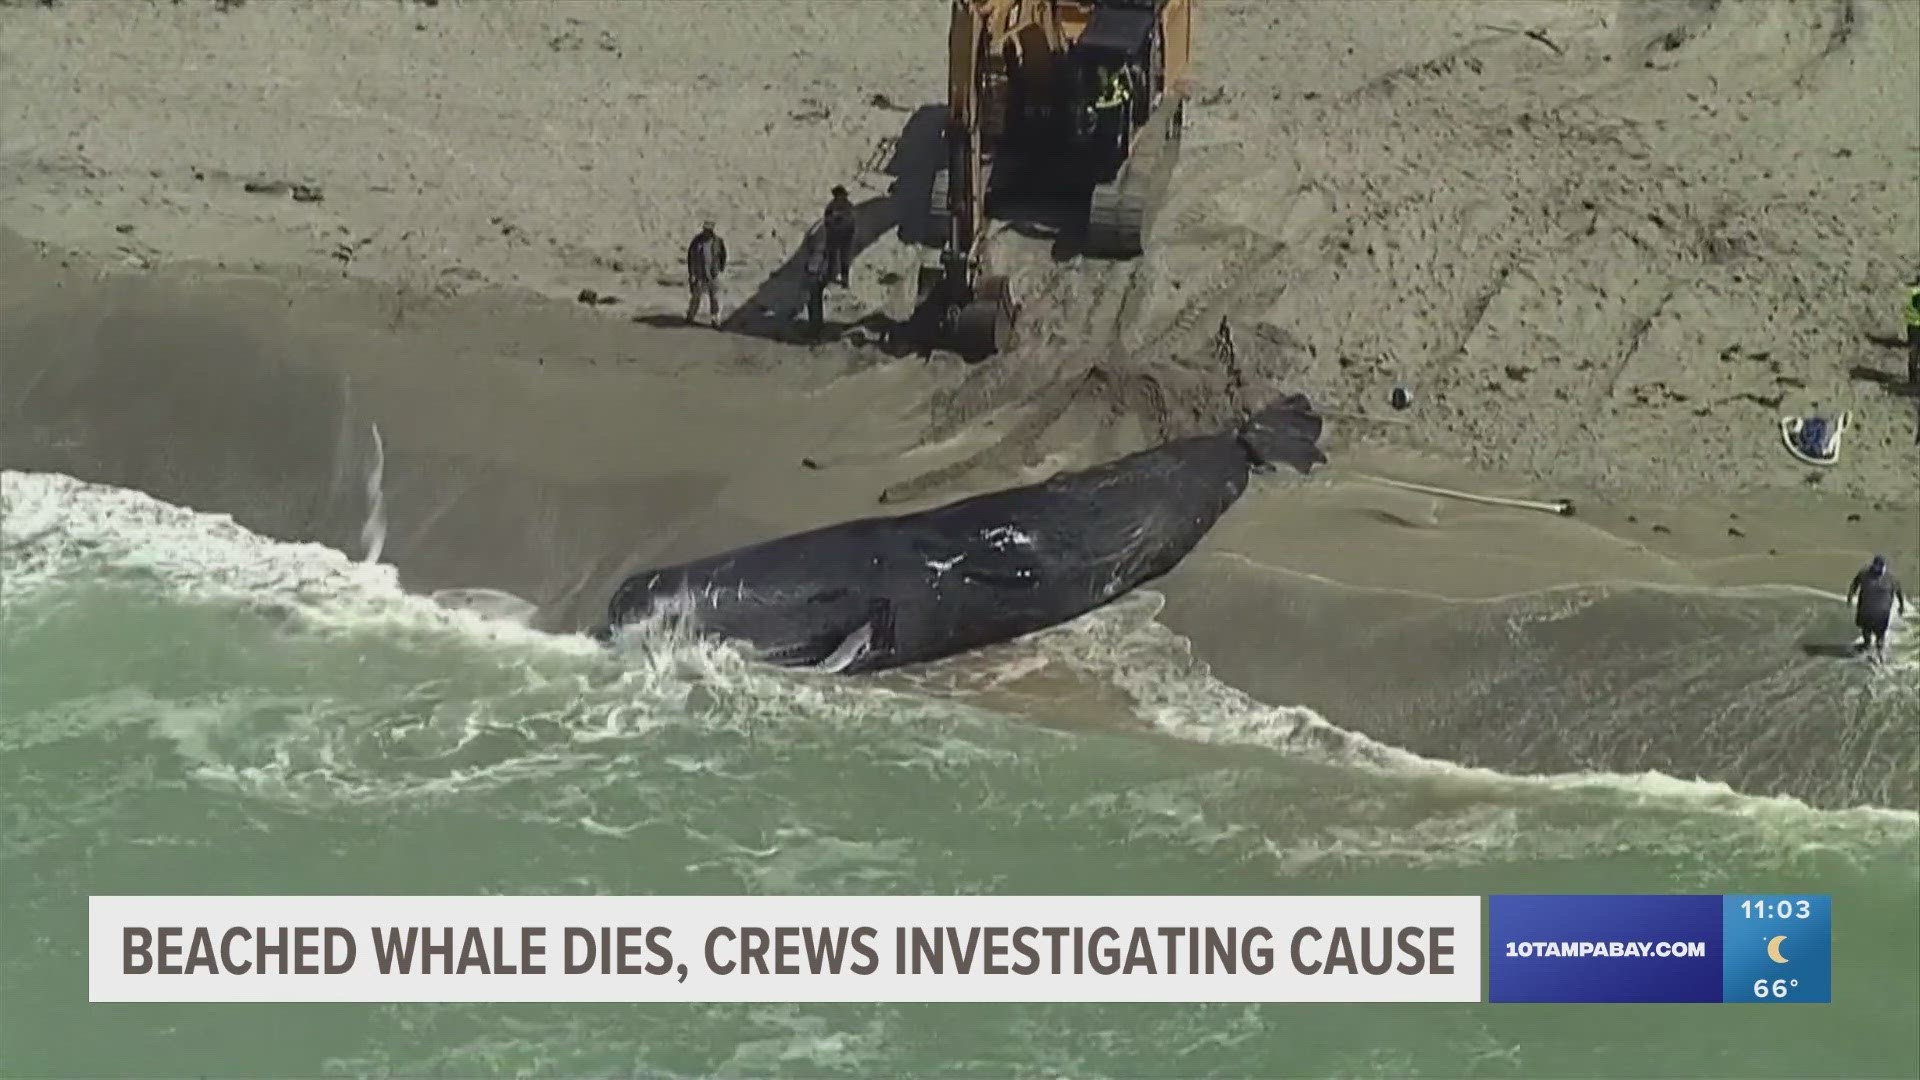 Swimmers are advised to stay out of the water at Venice Beach and locations south as sharks may be present.